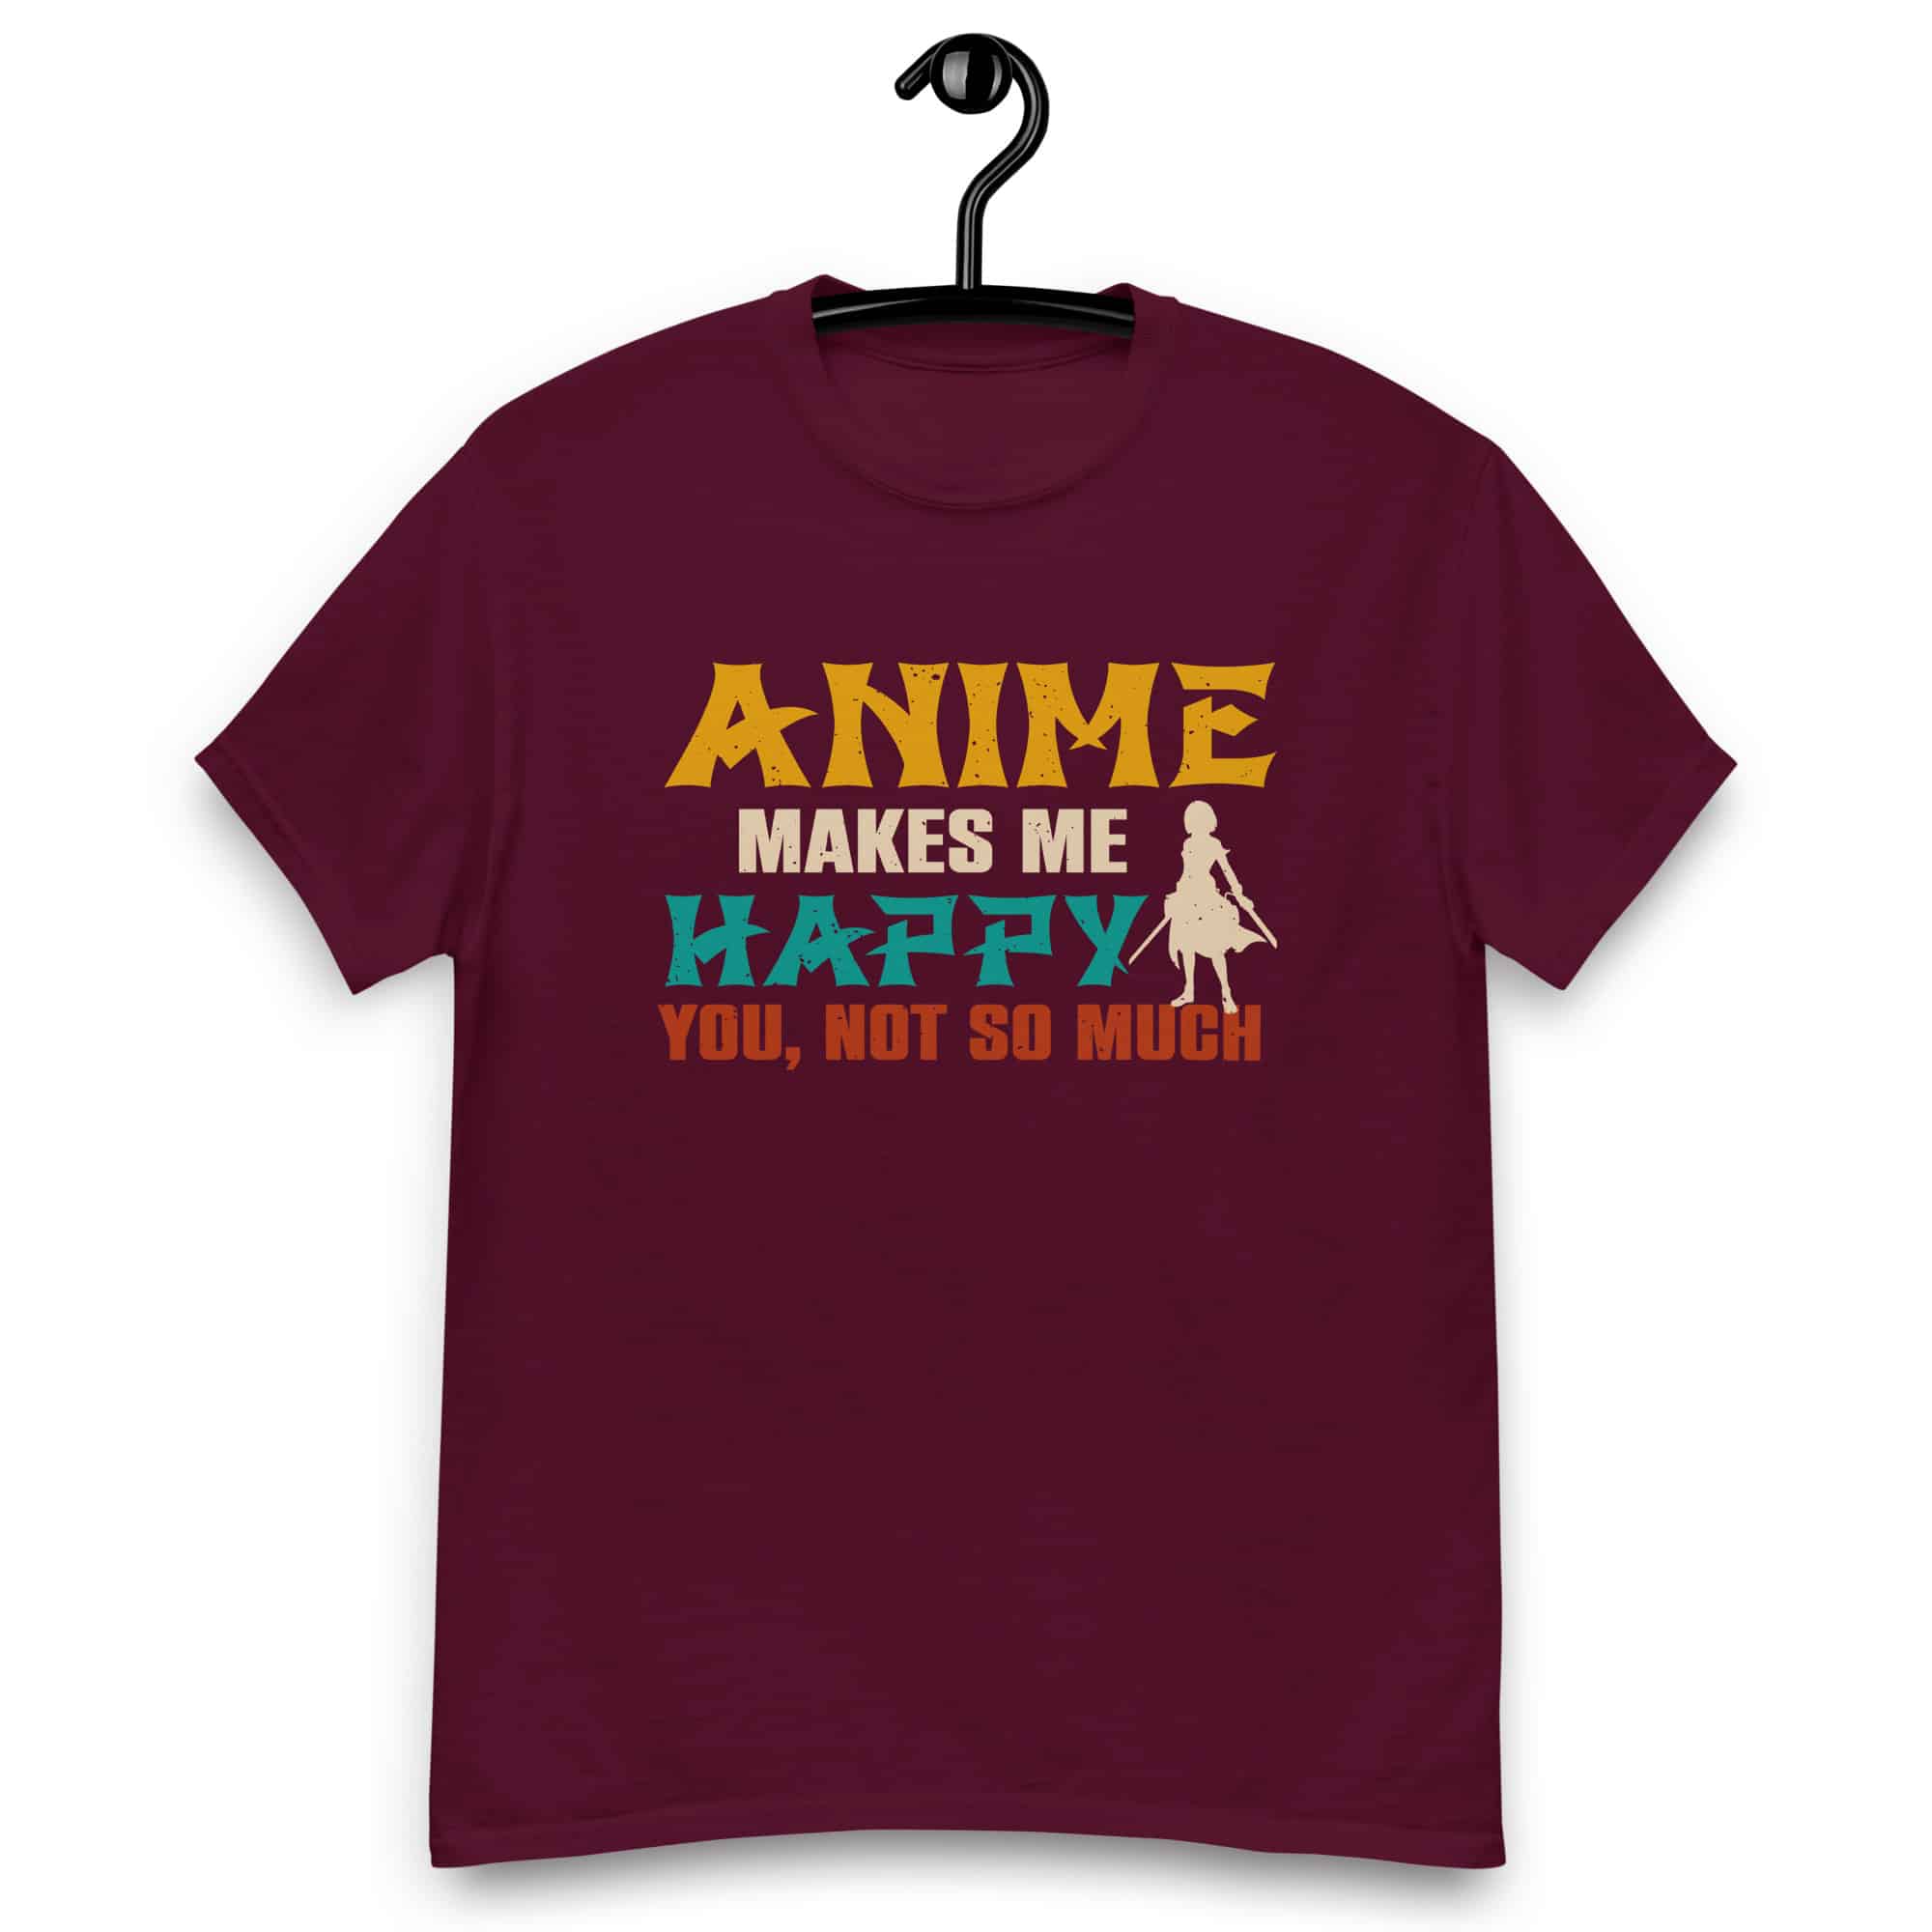 Anime Makes Me Happy Shirt Men's graphic t-shirts Men's designer shirts Premium sweatshirts Unisex hoodies Premium hooded sweatshirts Designer sweatshirts High-quality sweatshirts Luxury sweatshirts Unisex fleece sweatshirts Premium pullover sweatshirts Unisex heavyweight sweatshirts Premium cotton sweatshirts Video game store Gaming merchandise Gaming accessories shop Online gaming store Video game shop near me Gaming console store PC gaming store Gaming gear shop Retro gaming shop Board game shop Anime merchandise Anime store online Japanese anime shop Anime figurines Manga shop Anime DVDs Anime accessories Anime apparel Anime collectibles Anime gifts